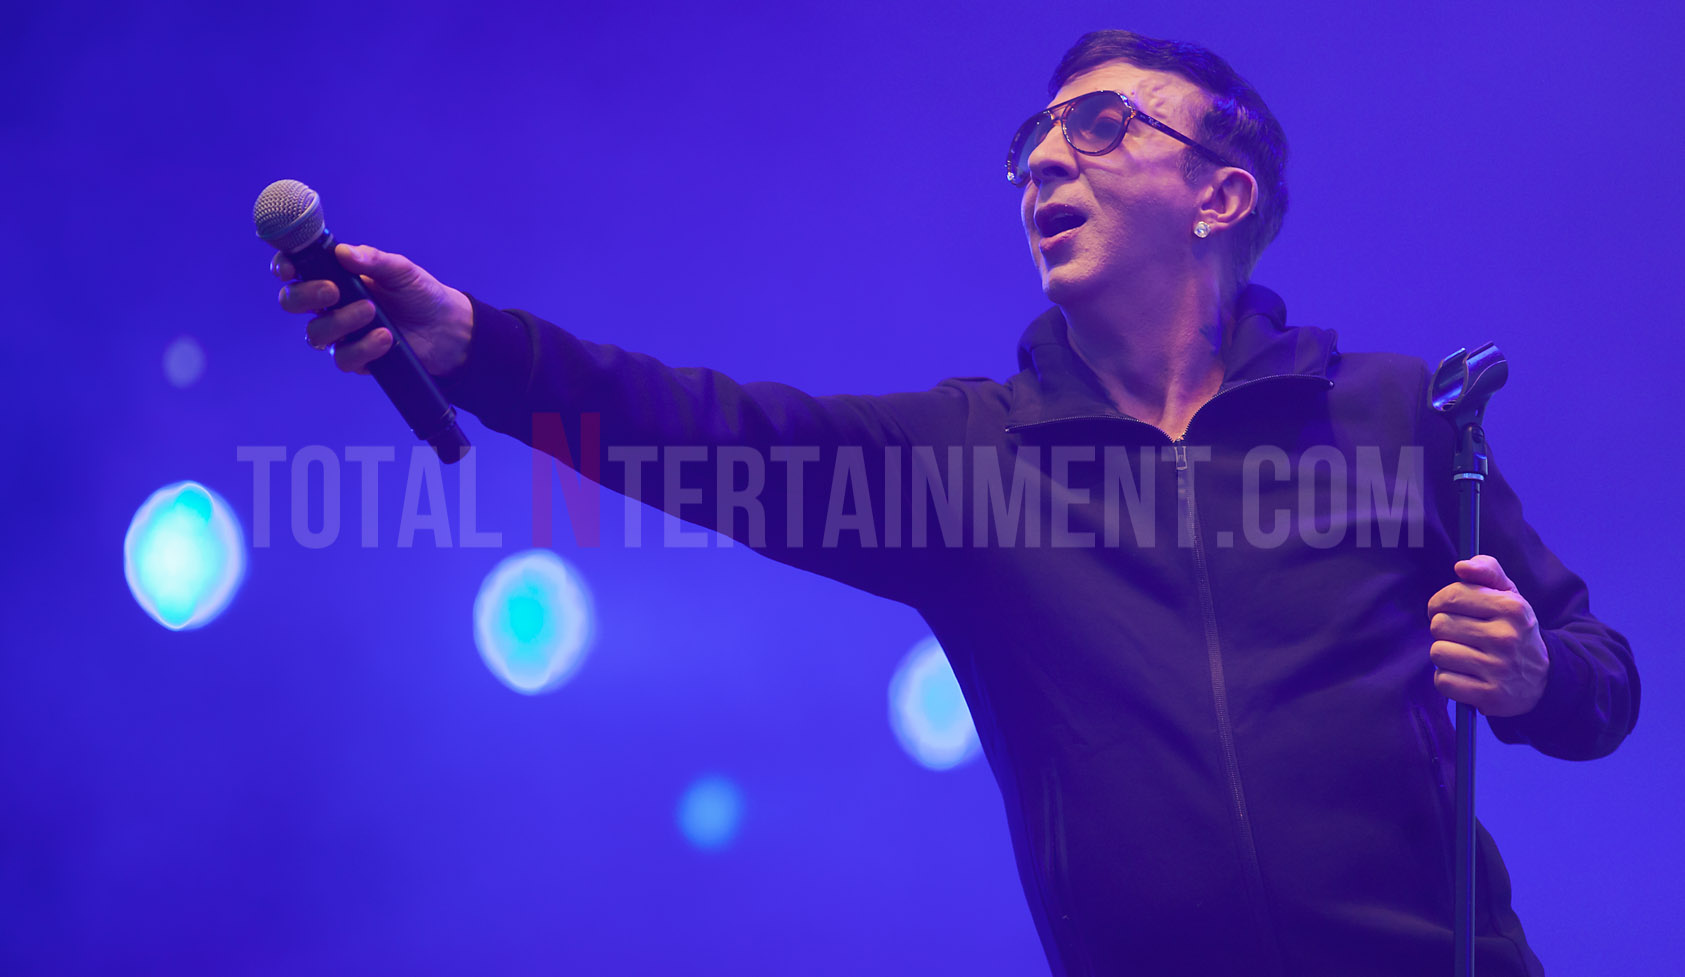 Soft Cell put on a dazzling display for their one off show in London